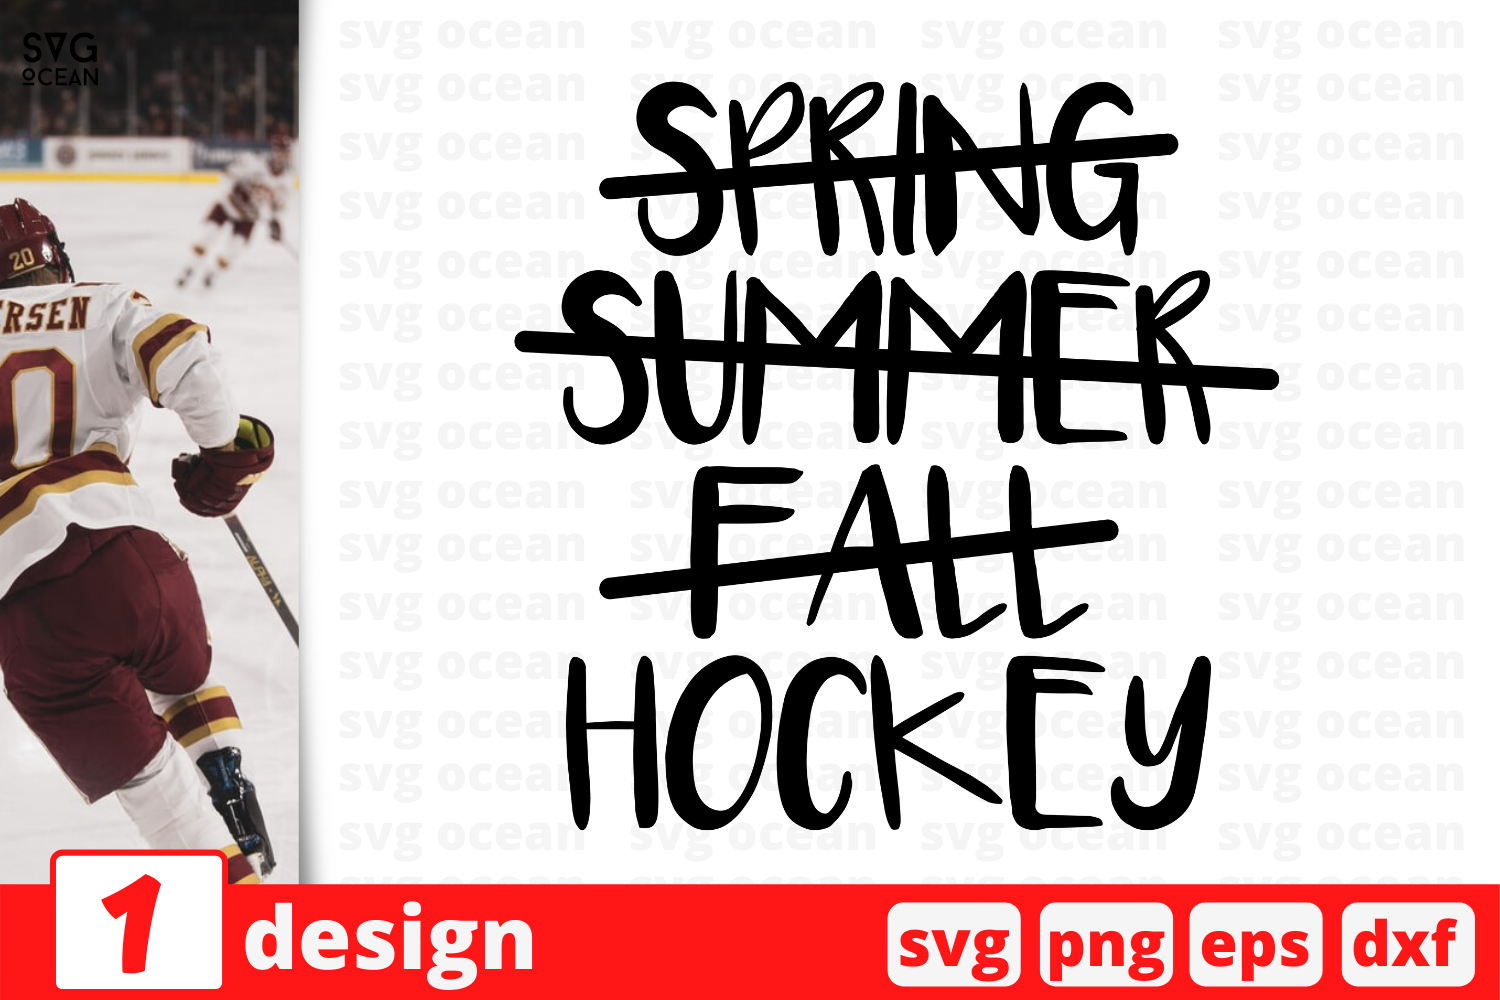 Download Spring Summer Fall Hockey Graphic By Svgocean Creative Fabrica PSD Mockup Templates